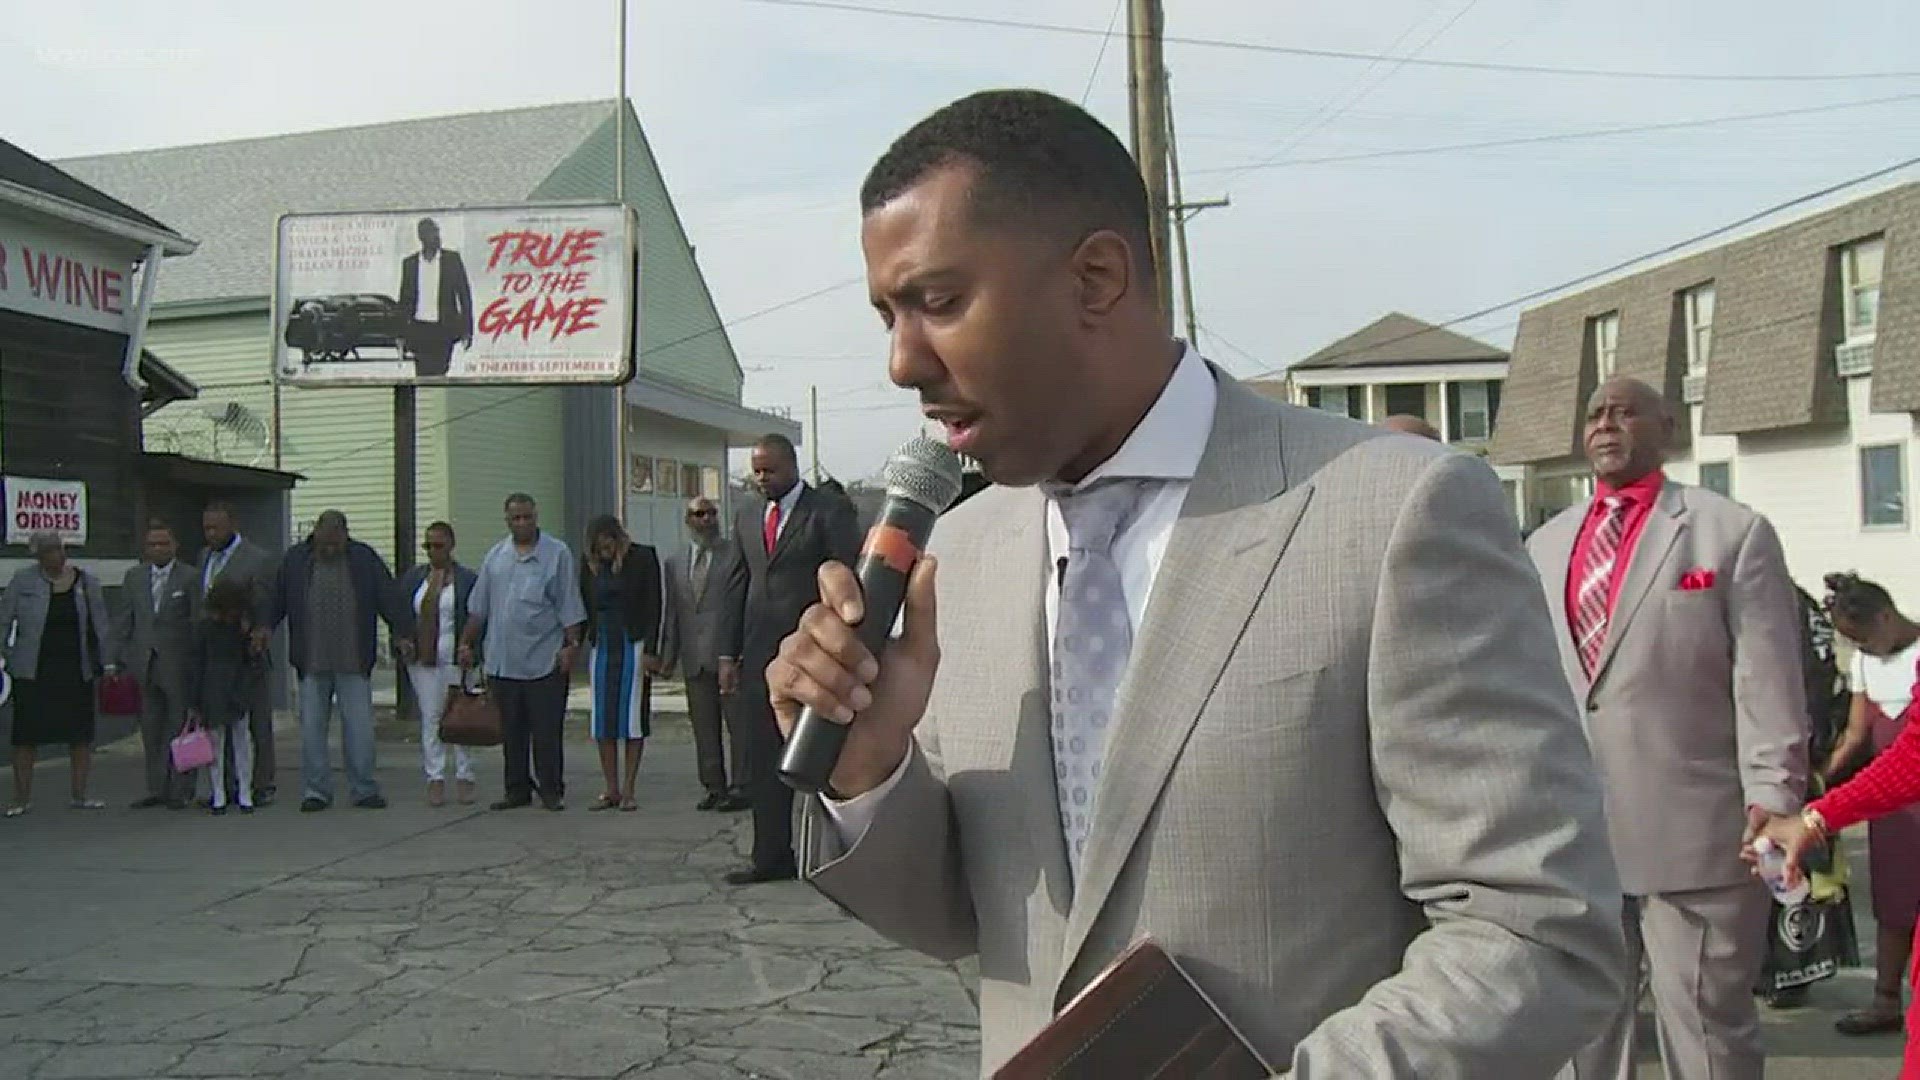 Members of the New Hope Baptist Church gathered on Sunday for a service to pray for the violence to end in the city.